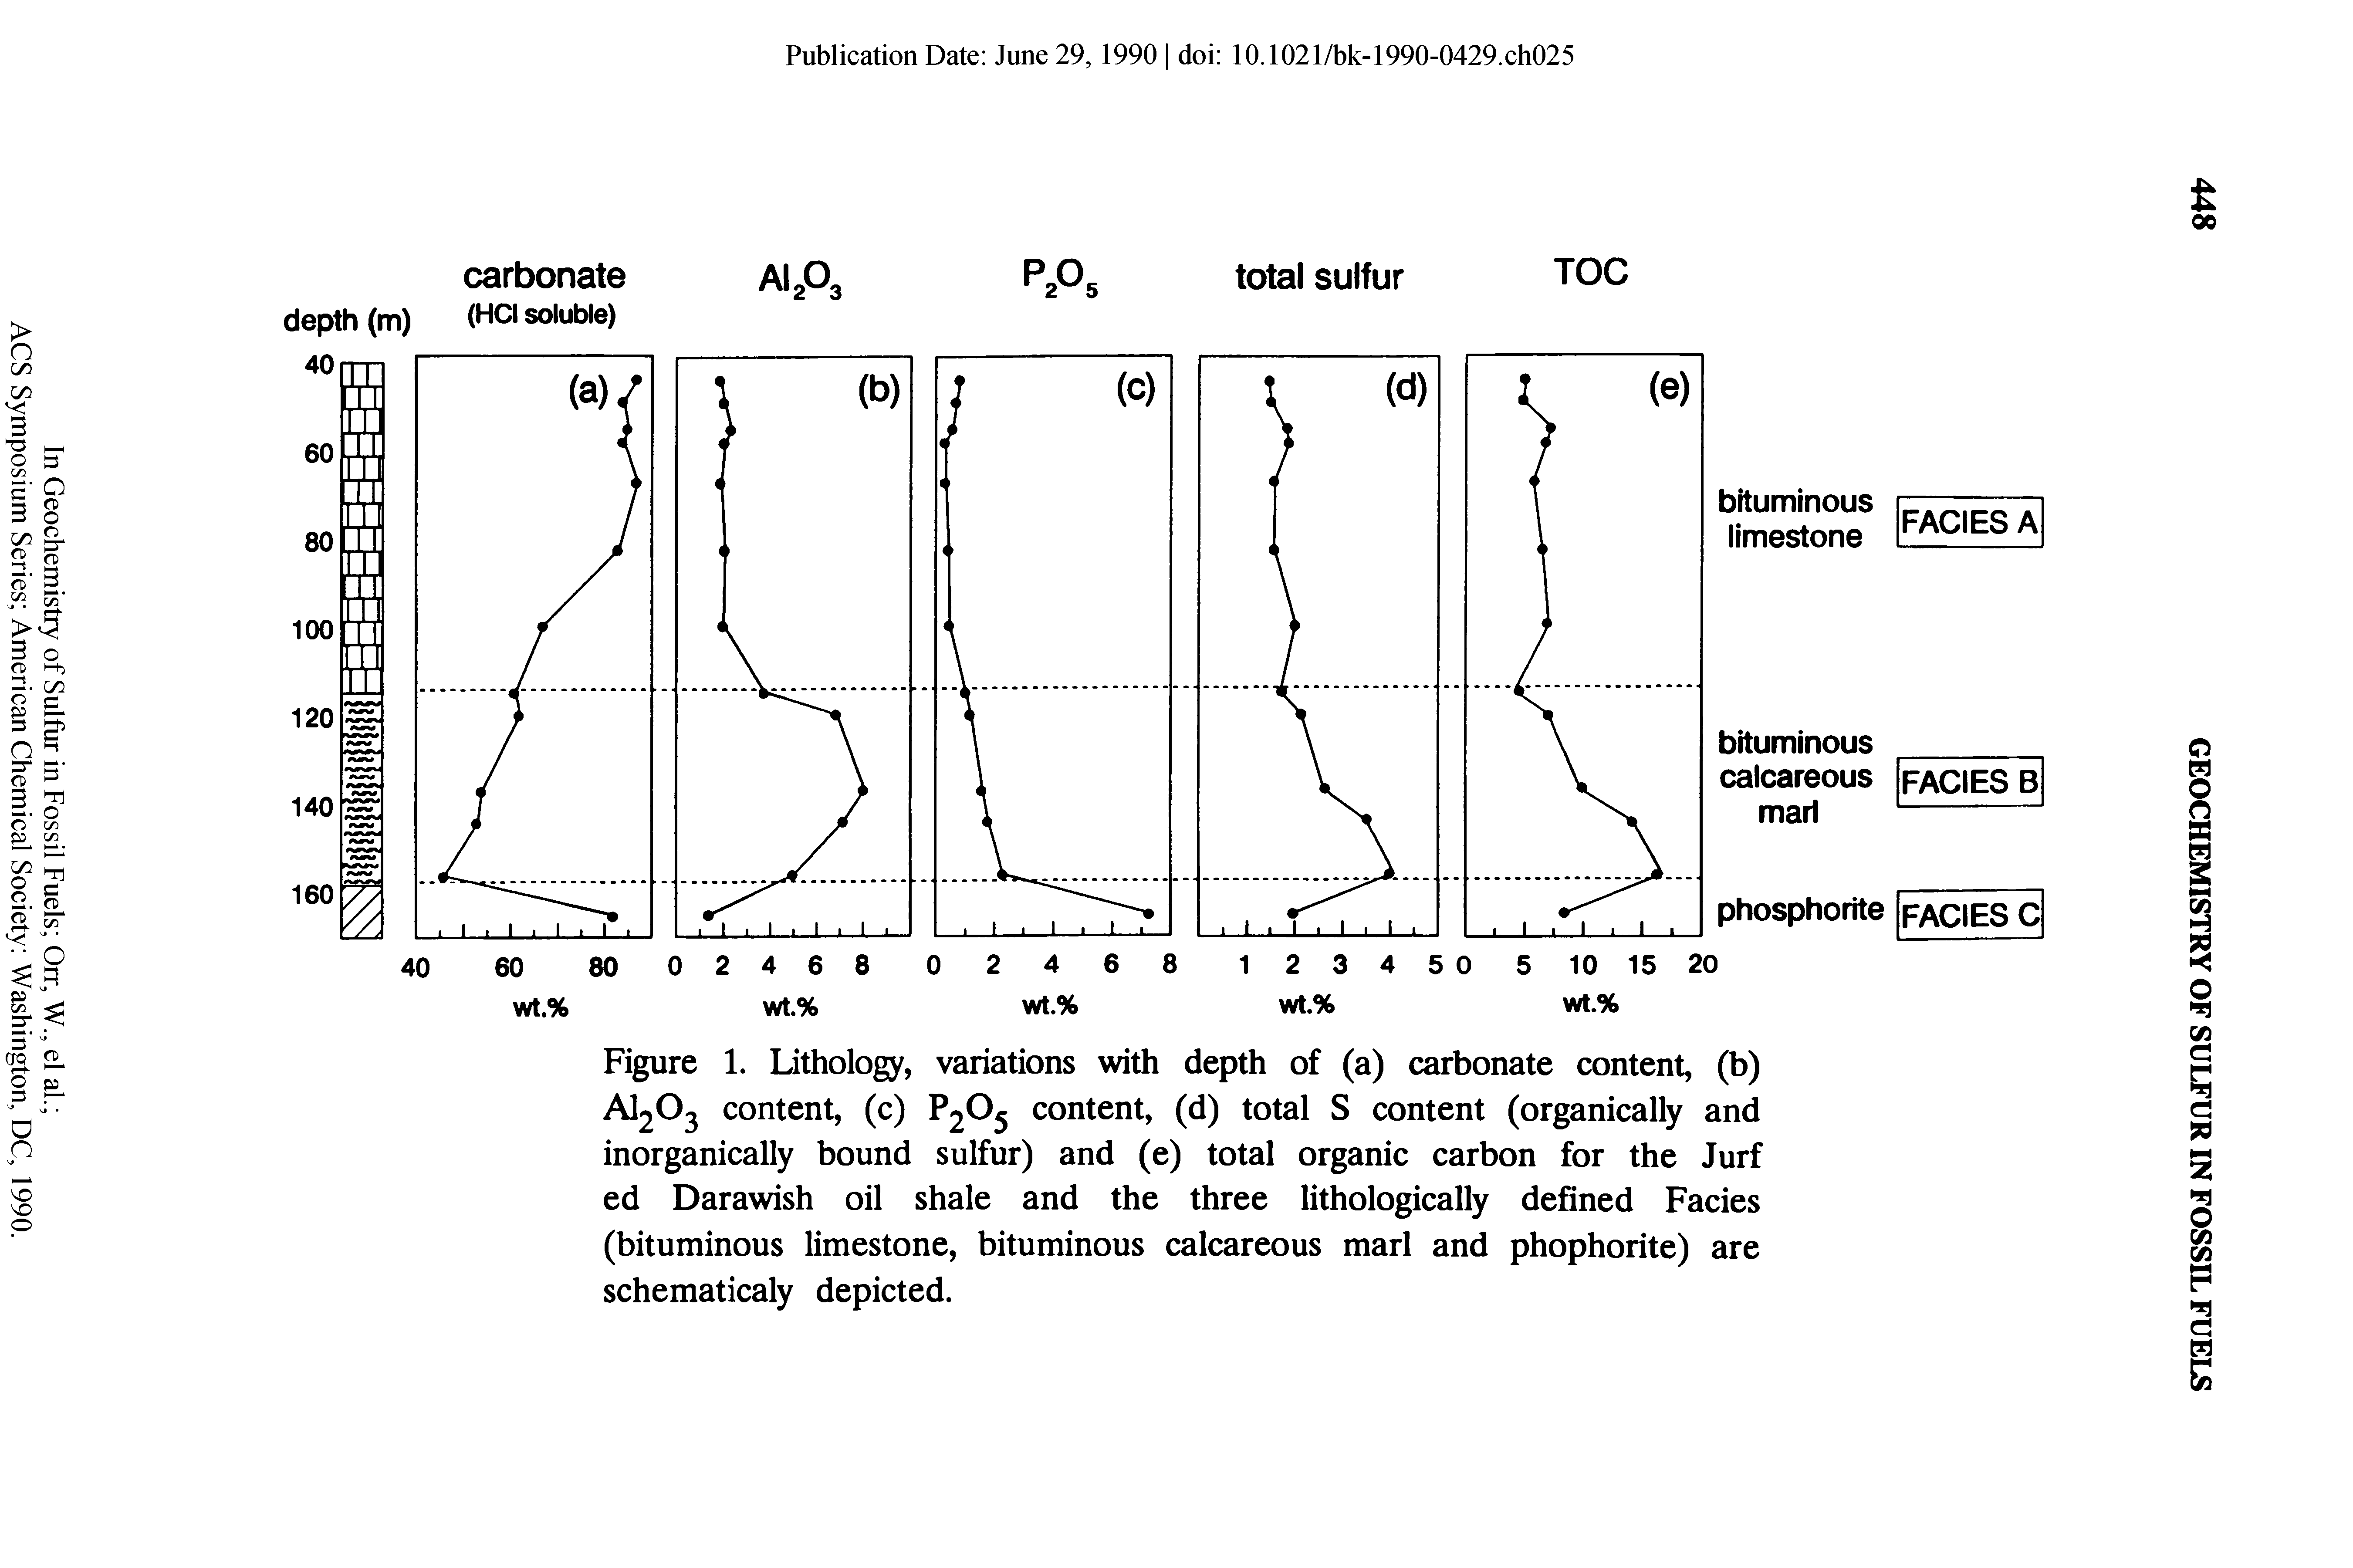 Figure 1. Lithology, variations with depth of (a) carbonate content, (b) A1203 content, (c) P205 content, (d) total S content (organically and inorganically bound sulfur) and (e) total organic carbon for the Jurf ed Darawish oil shale and the three lithologically defined Facies (bituminous limestone, bituminous calcareous marl and phophorite) are schematicaly depicted.